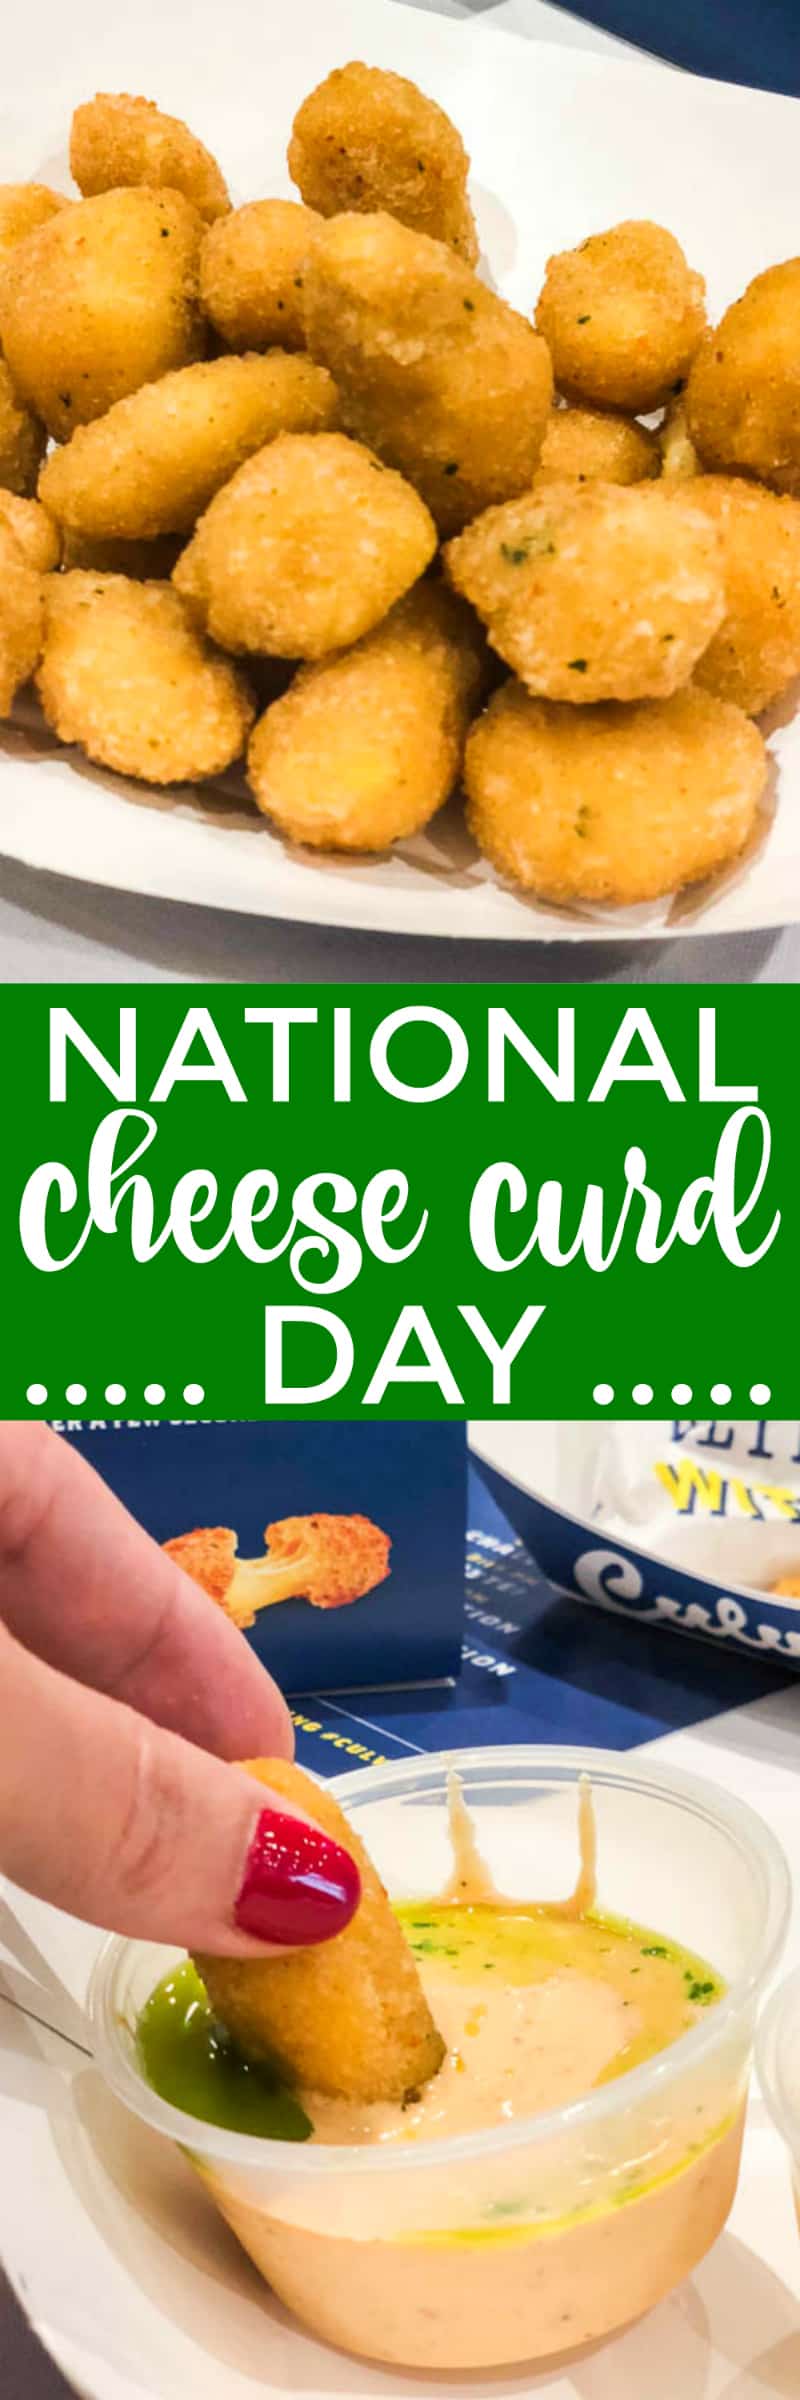 National Cheese Curd Day Lemon Tree Dwelling